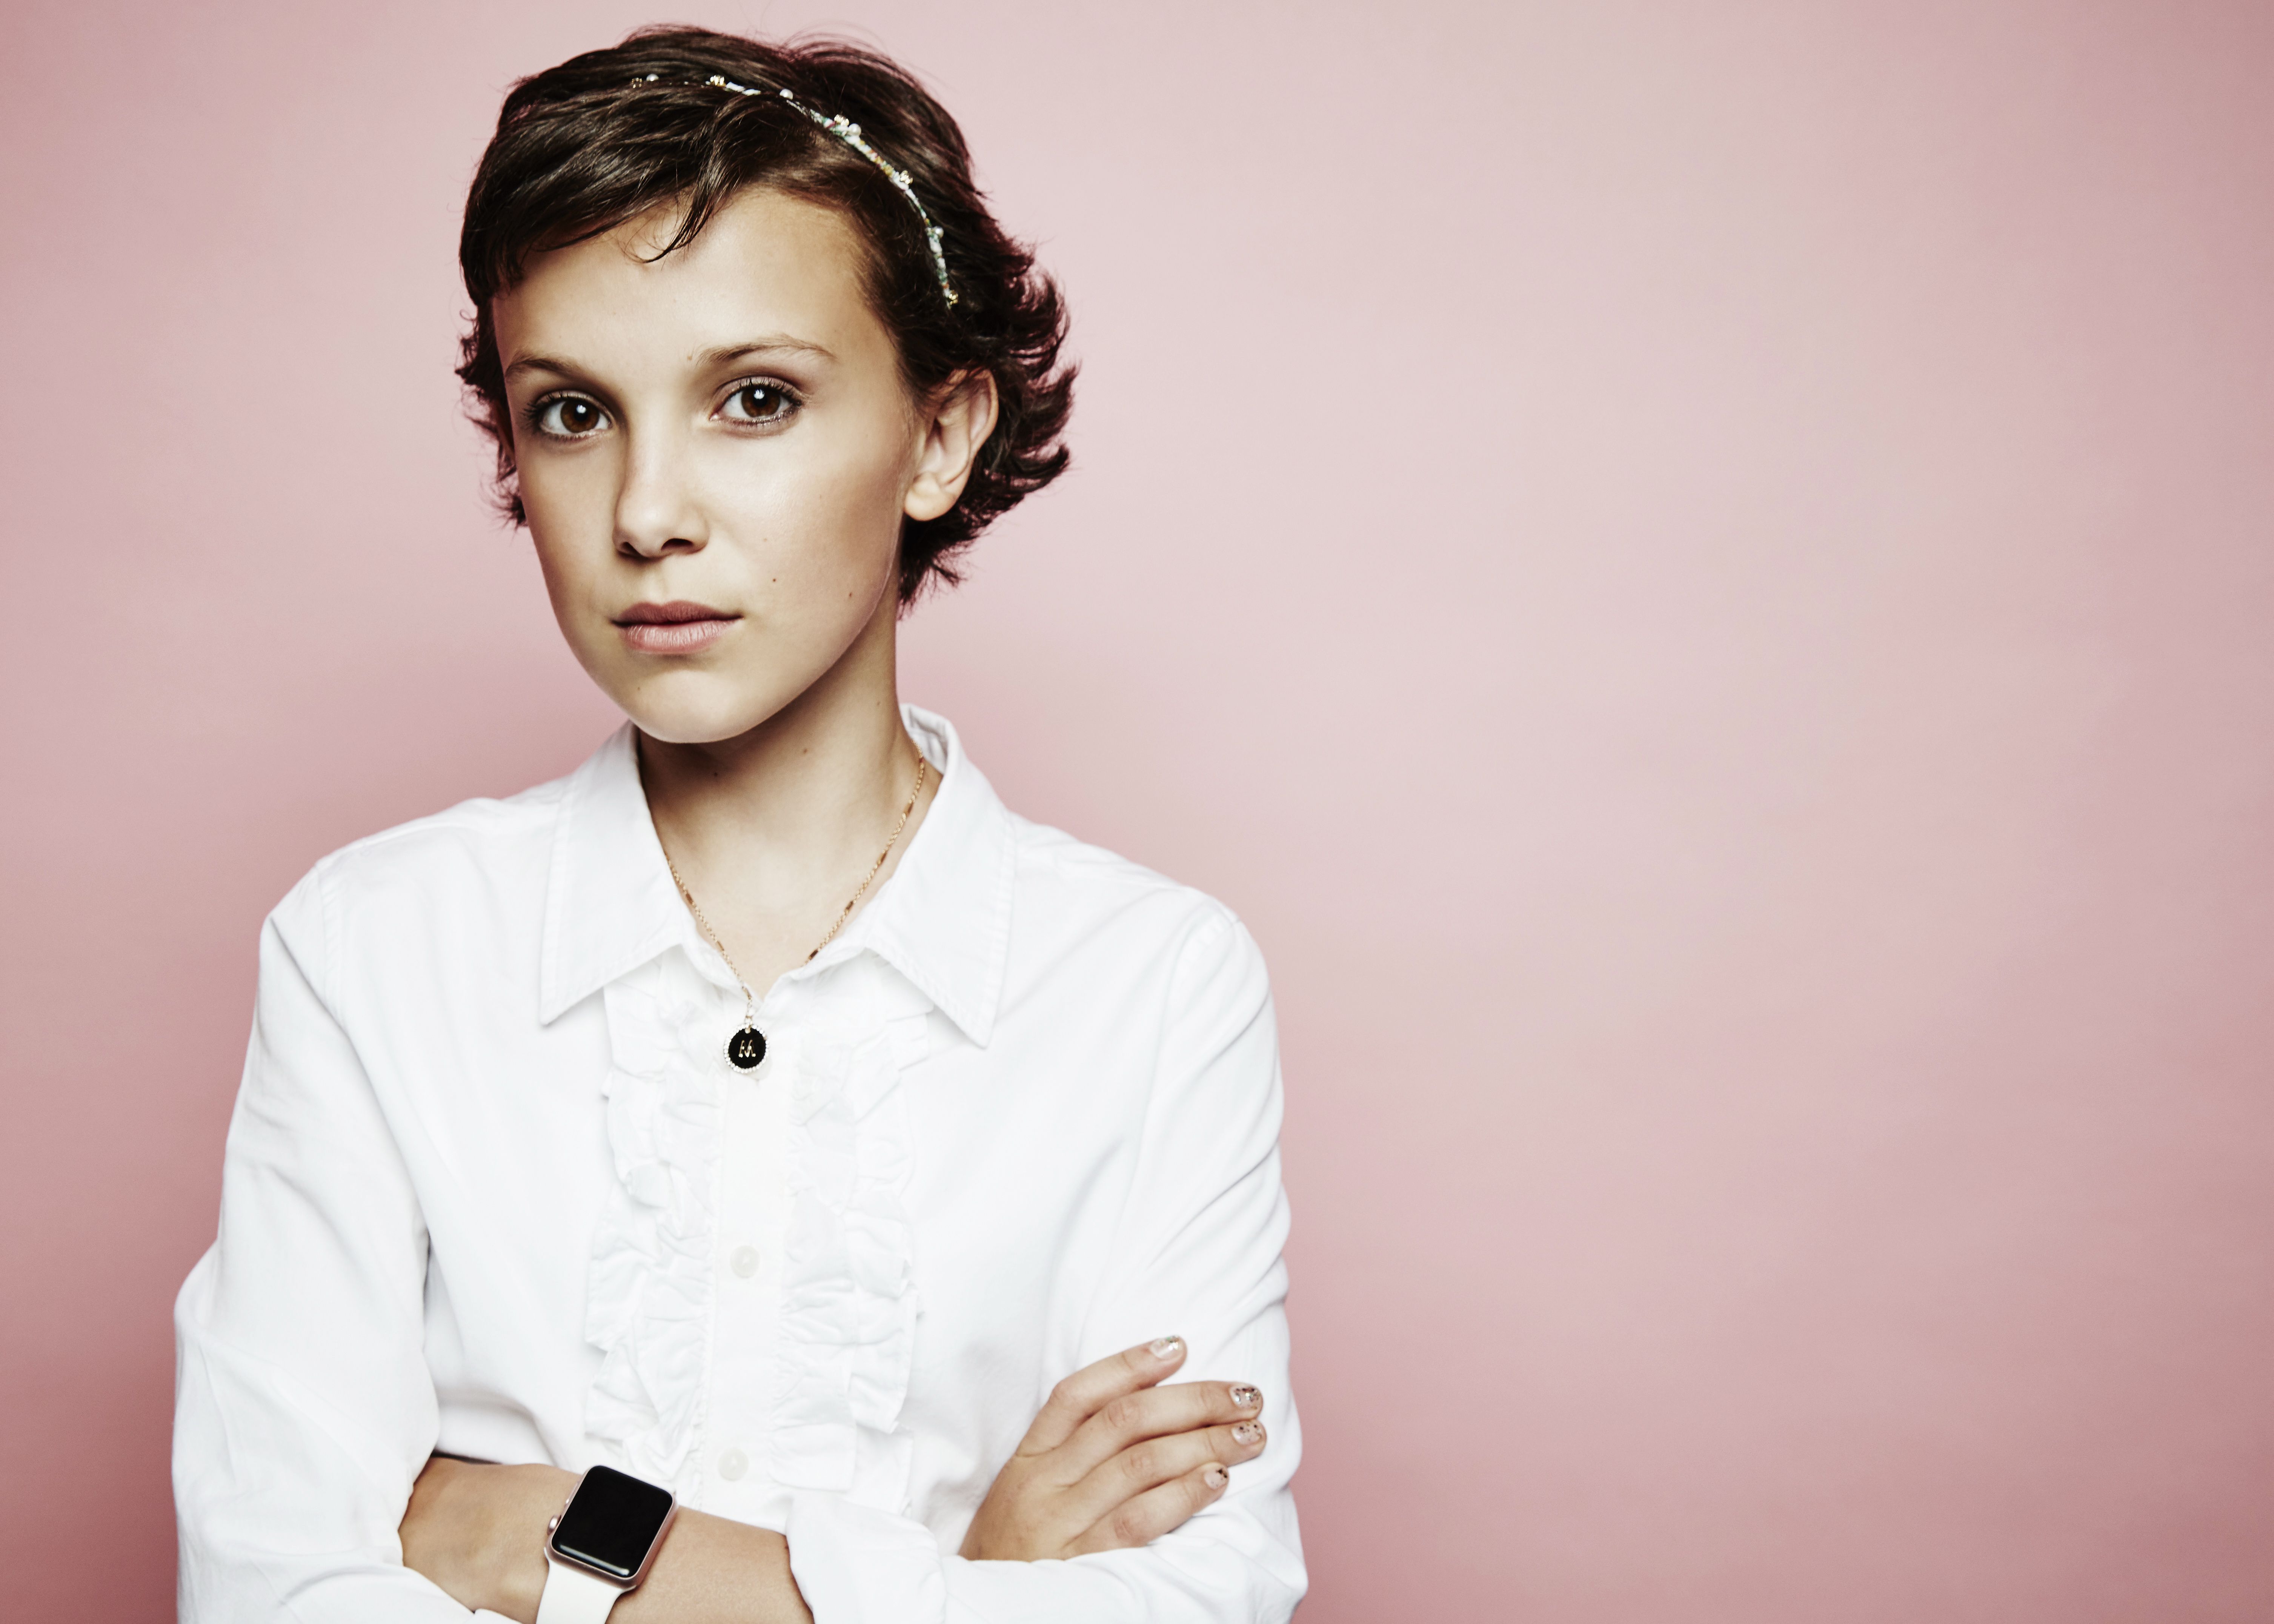 5. Millie Bobby Brown - wide 2